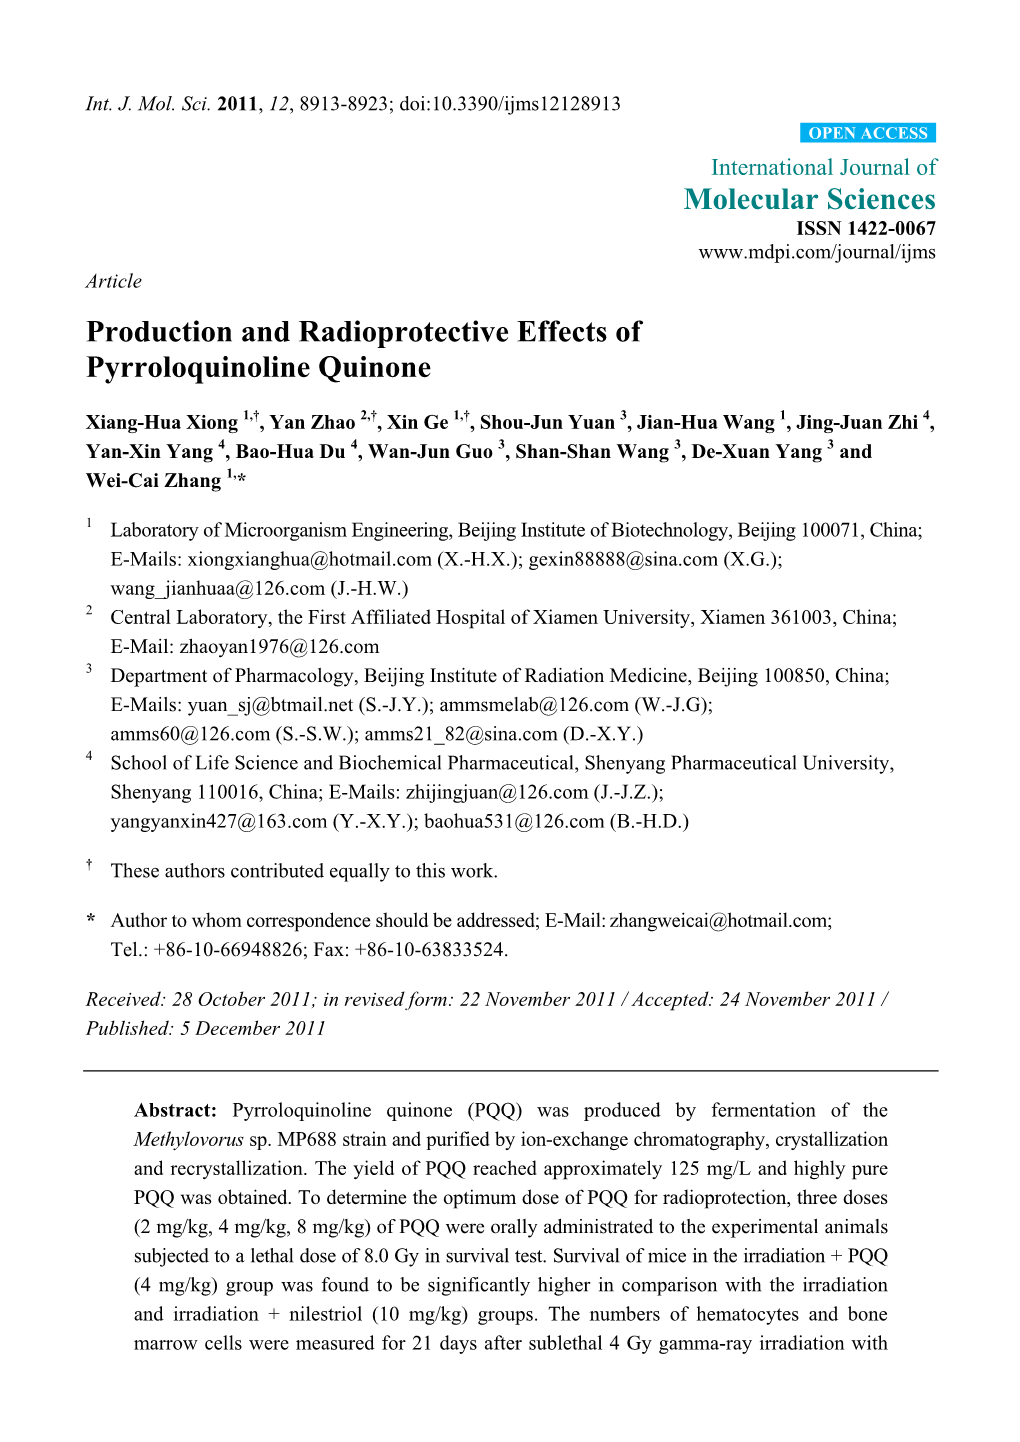 Production and Radioprotective Effects of Pyrroloquinoline Quinone